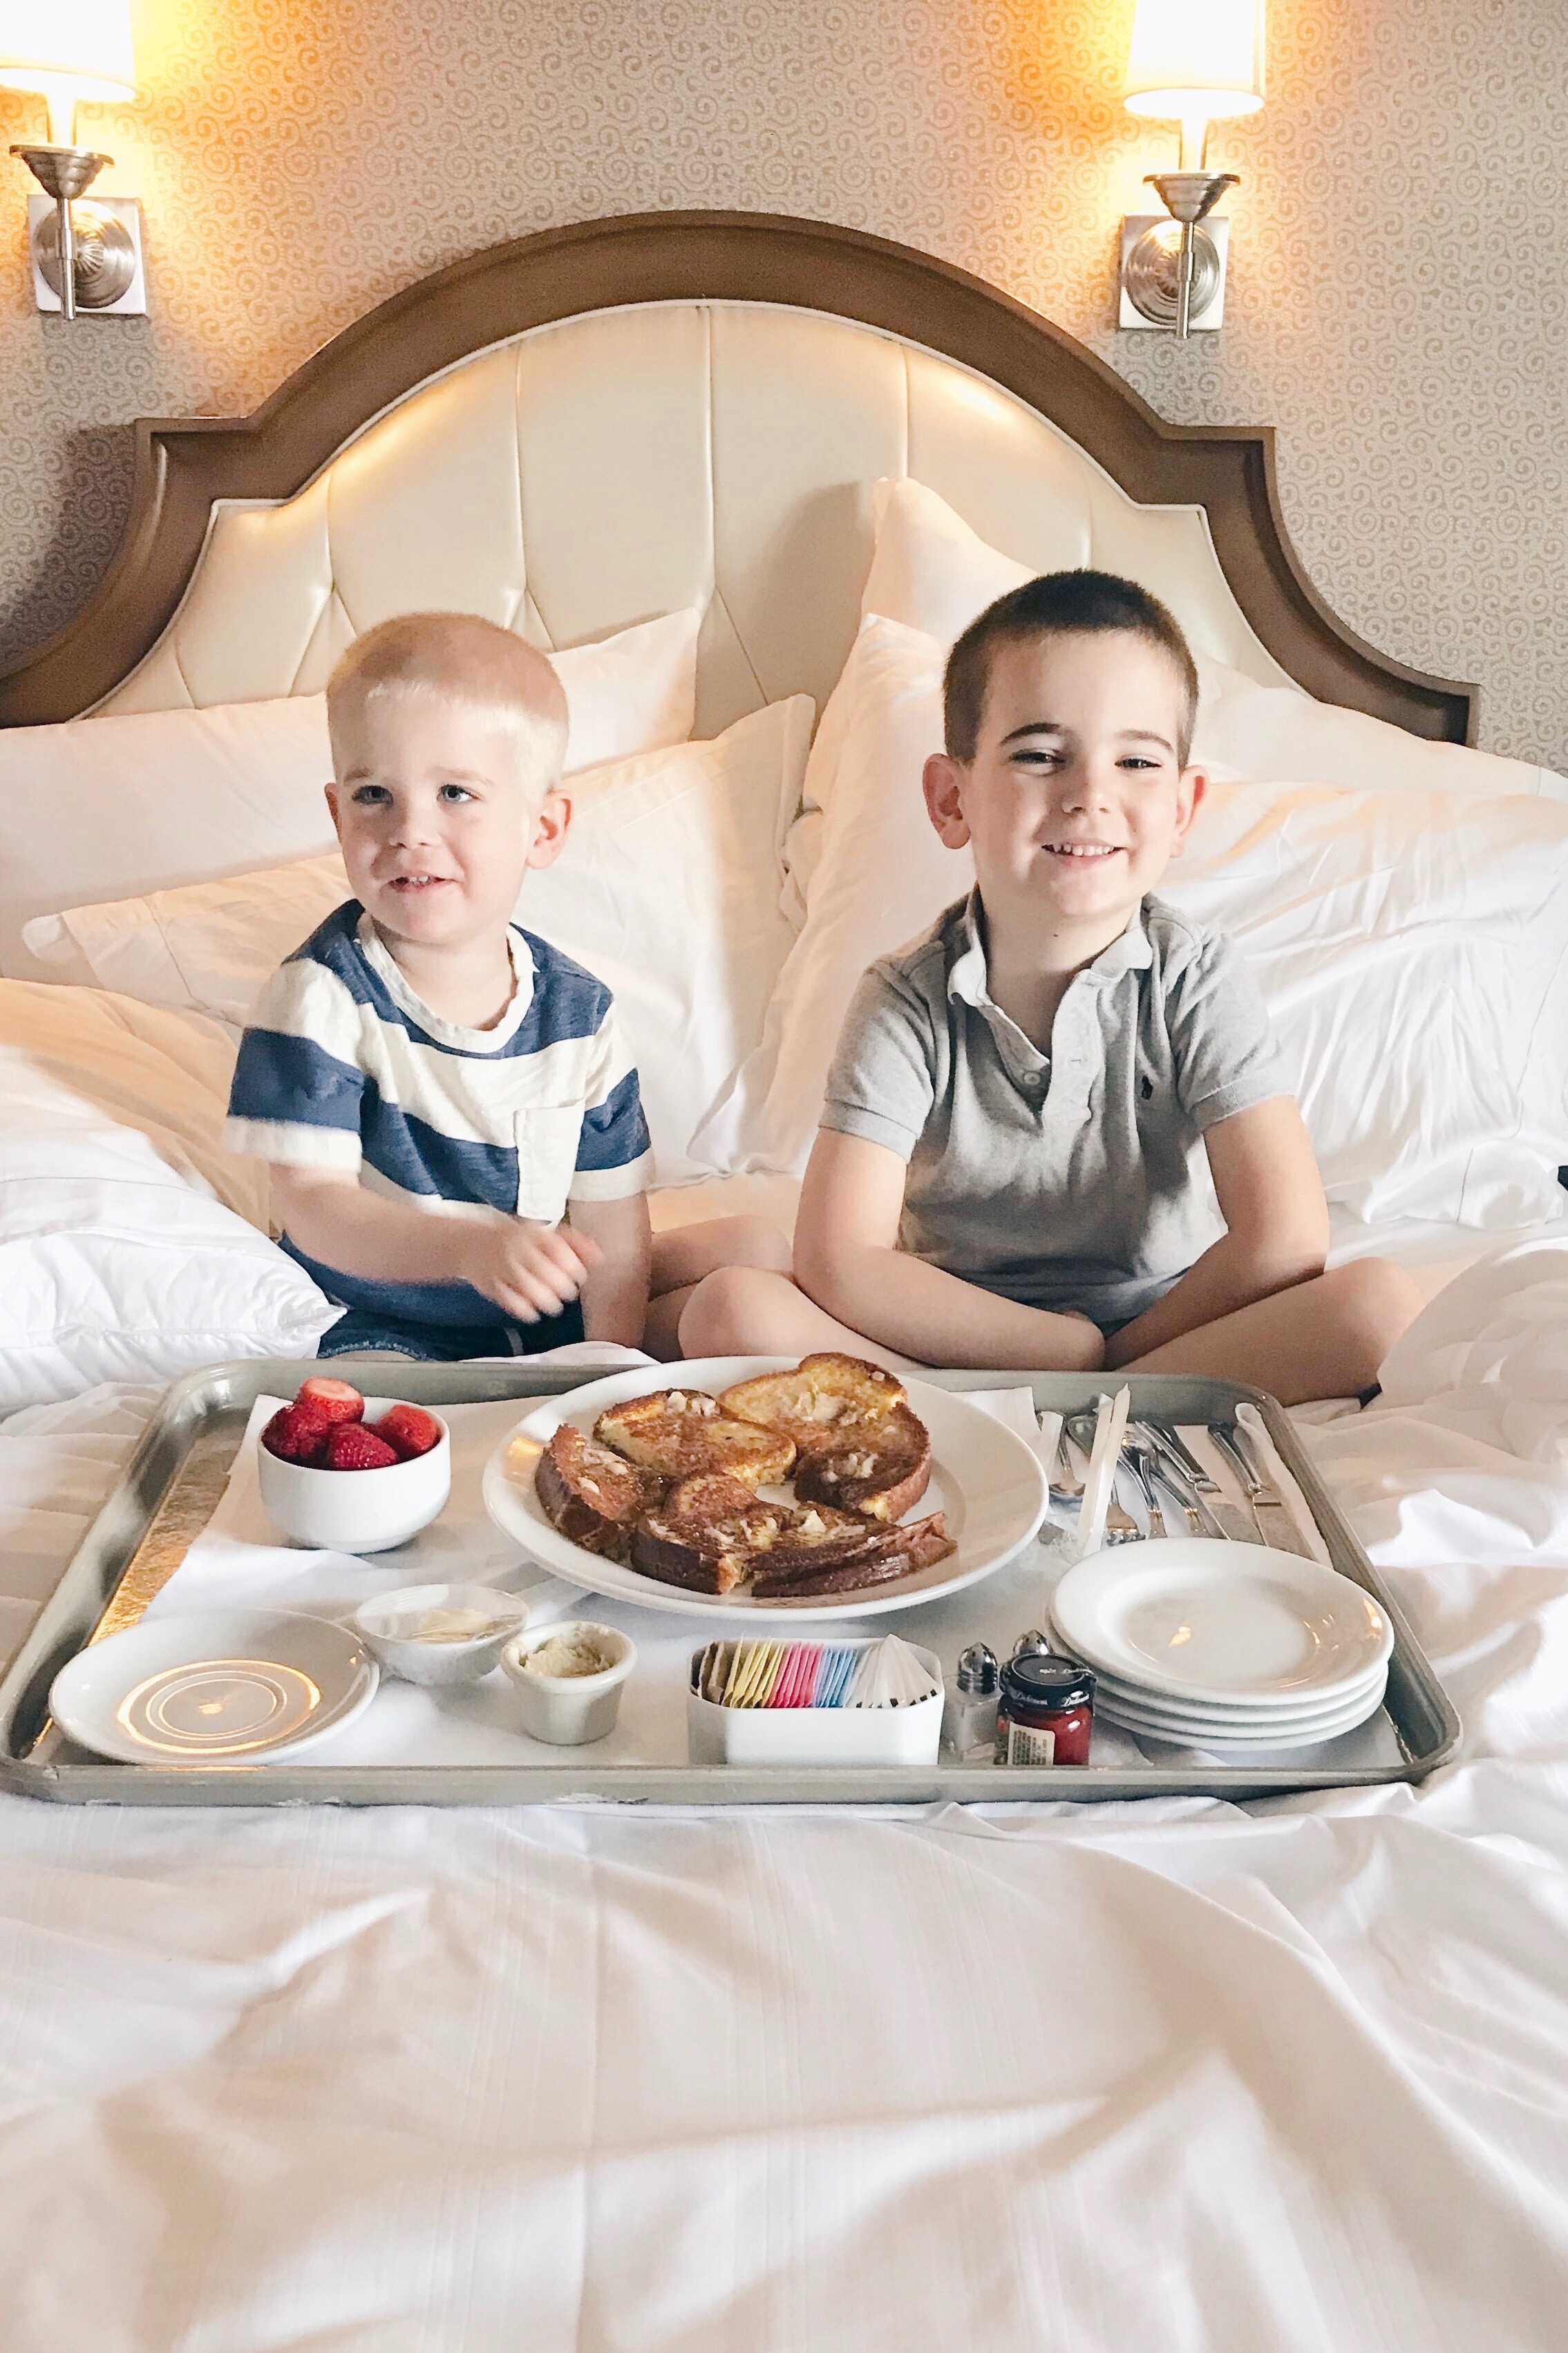 meal plans to save money on a Disney vacation - 2 little boys eating breakfast in bed